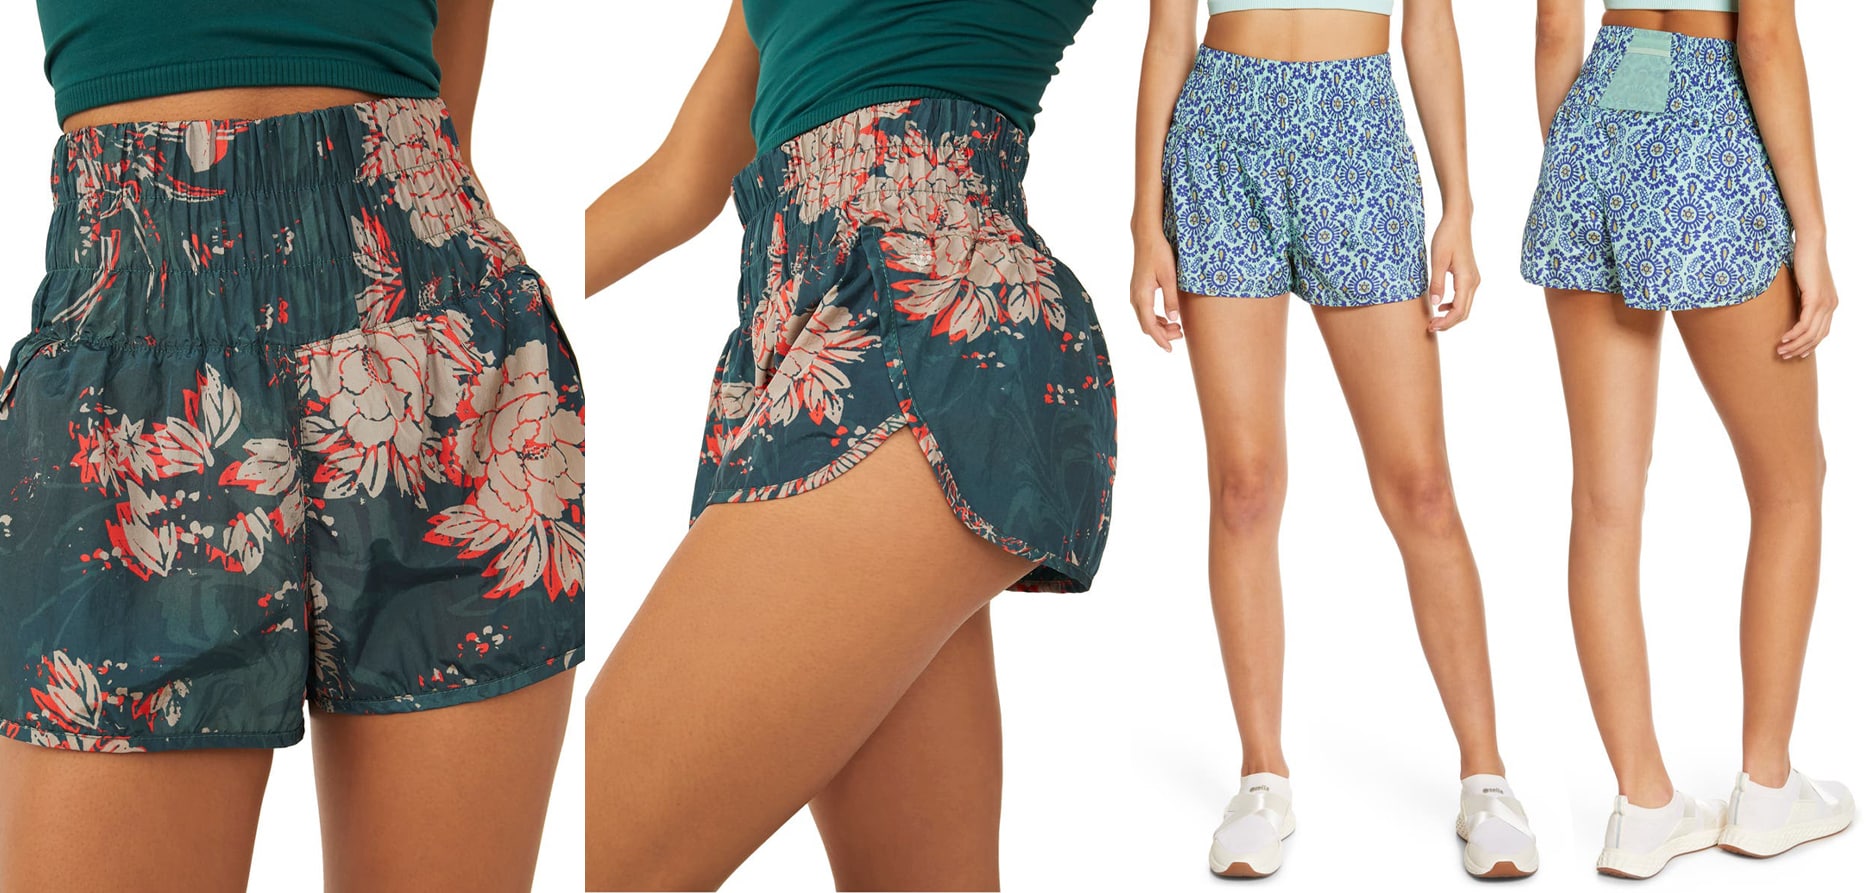 Free People's The Way Home features a flattering dolphin hem and an elastic waist for comfort